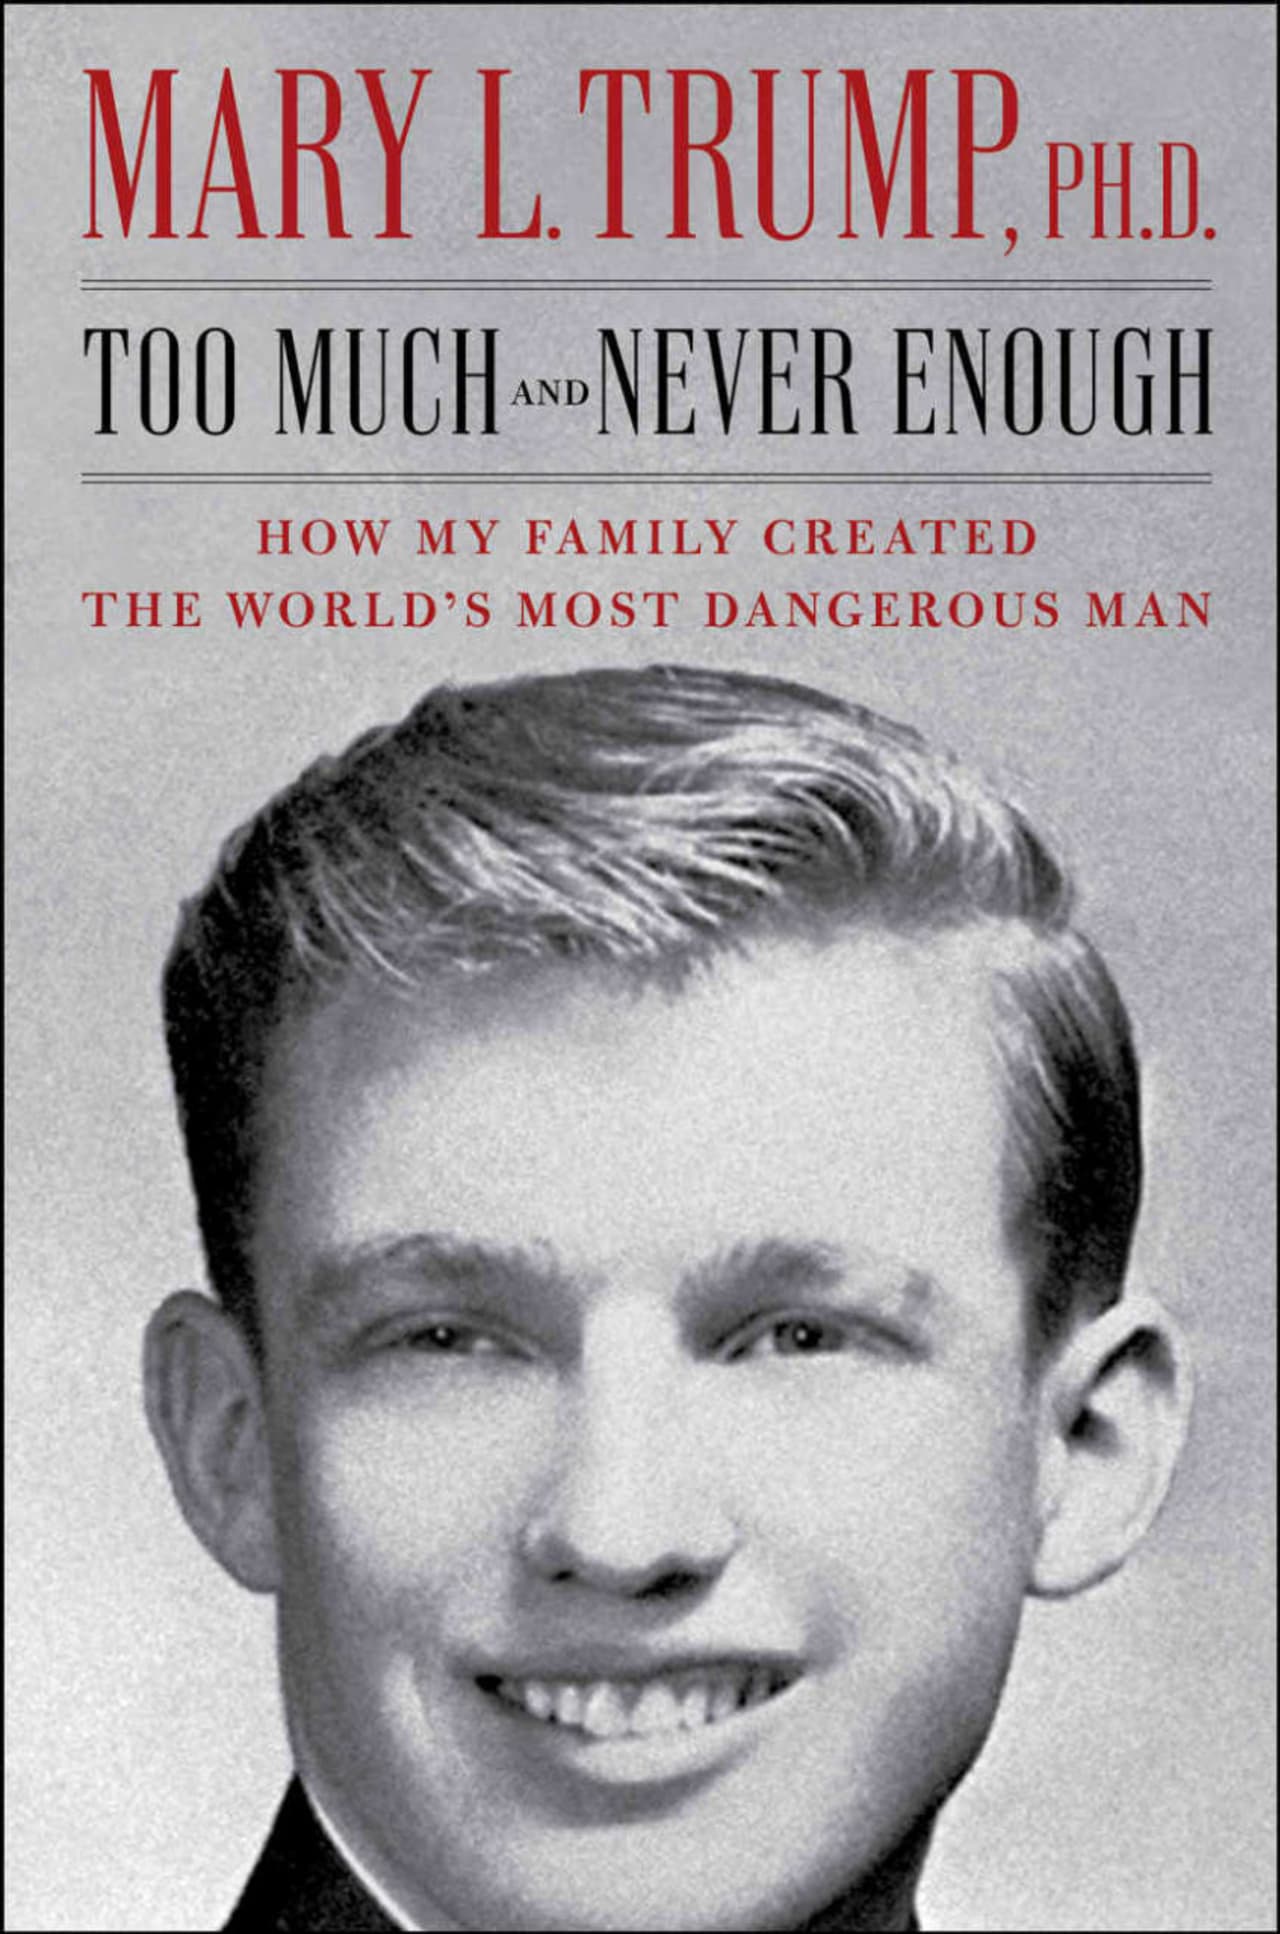 "Too Much and Never Enough: How My Family Created The World's Most Dangerous Man," is the name of the newly released book by Mary Trump, Ph.D., on her uncle, Donald Trump. Mary Trump is a psychiatrist.